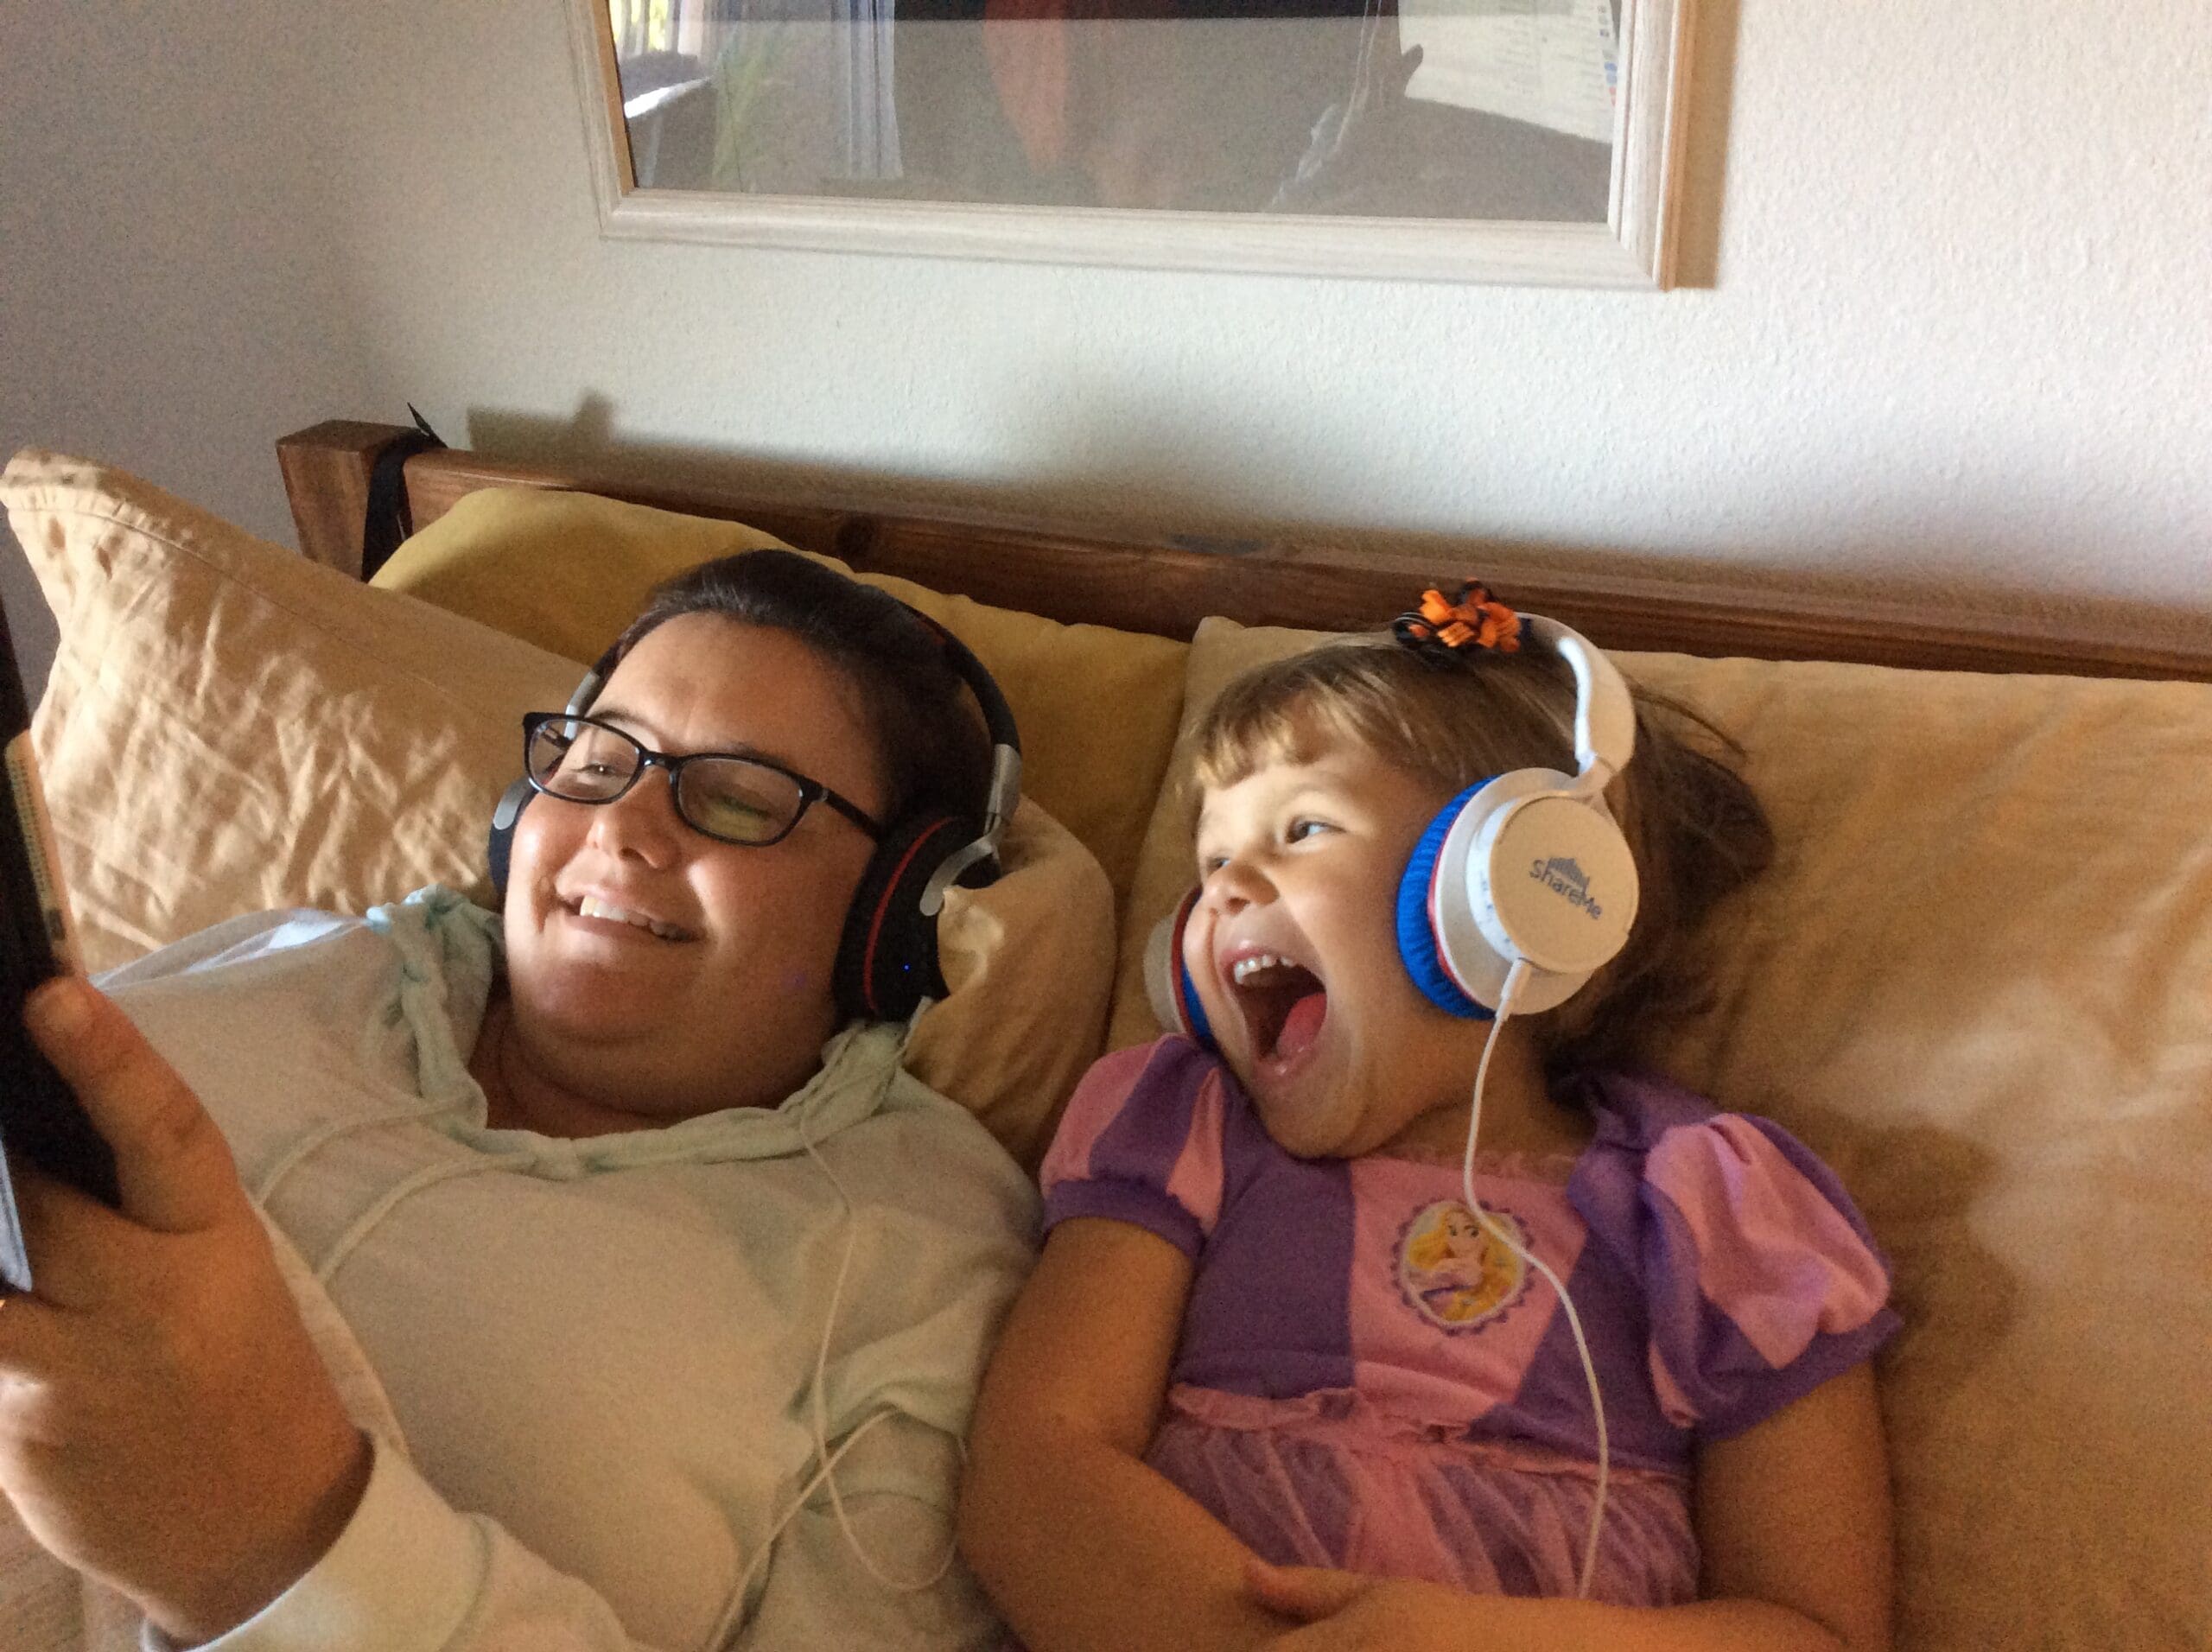 Mom and daughter with headphones watching a movie on iPad